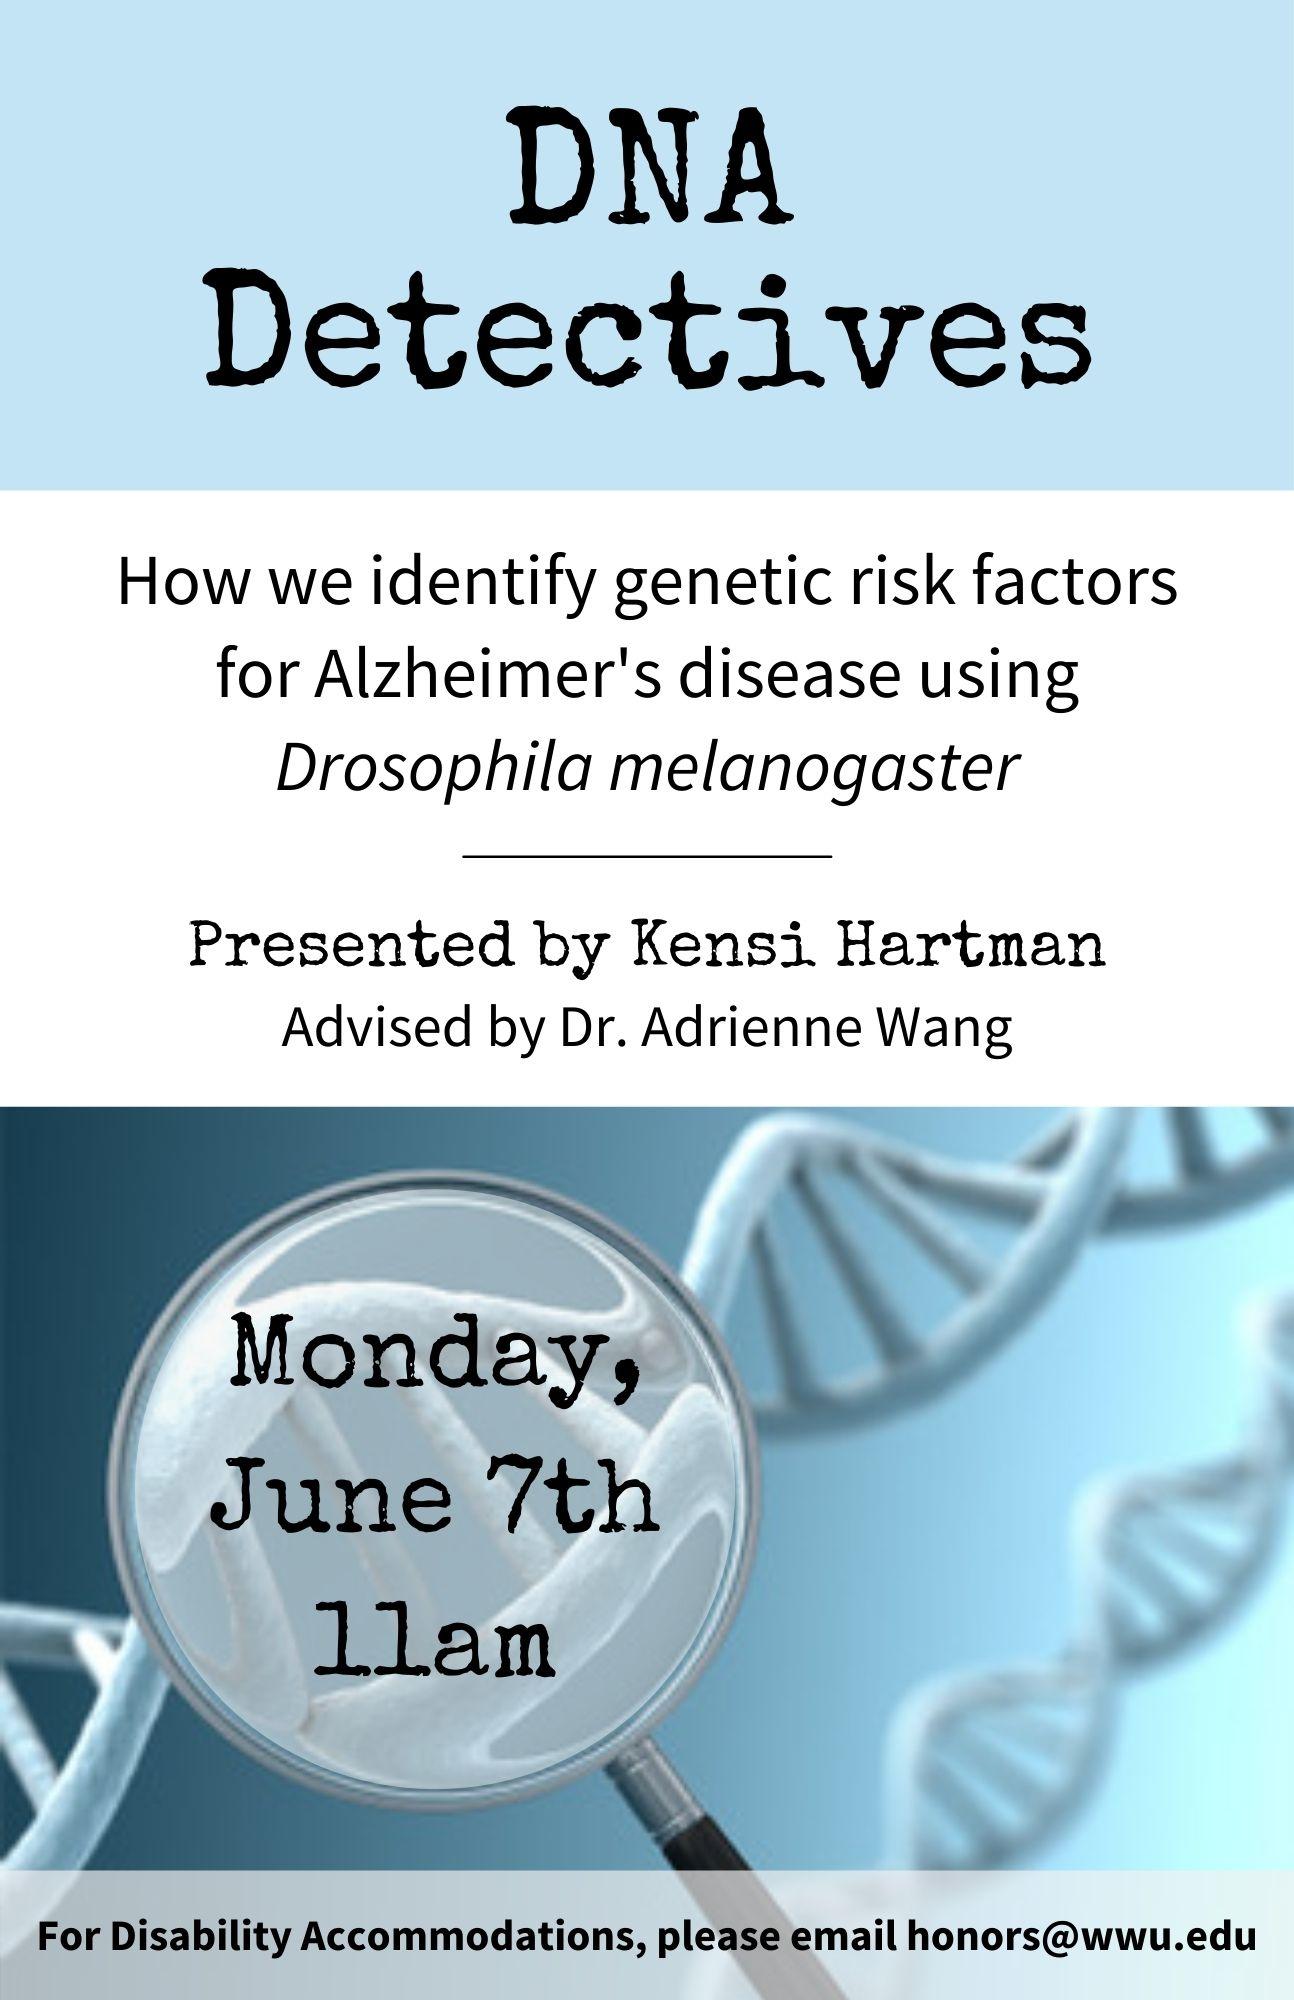 Blue and white poster with a cartoon magnifying glass over an image of a DNA double helix. Text reads "DNA Detectives: How we identify genetic risk factors for Alzheimer's disease using Drosophila melanogaster. Presented by Kensi Hartman, advised by Dr. Adrienne Wang. Monday, June 7th at 11am. For disability accommodations please email honors@wwu.edu". 